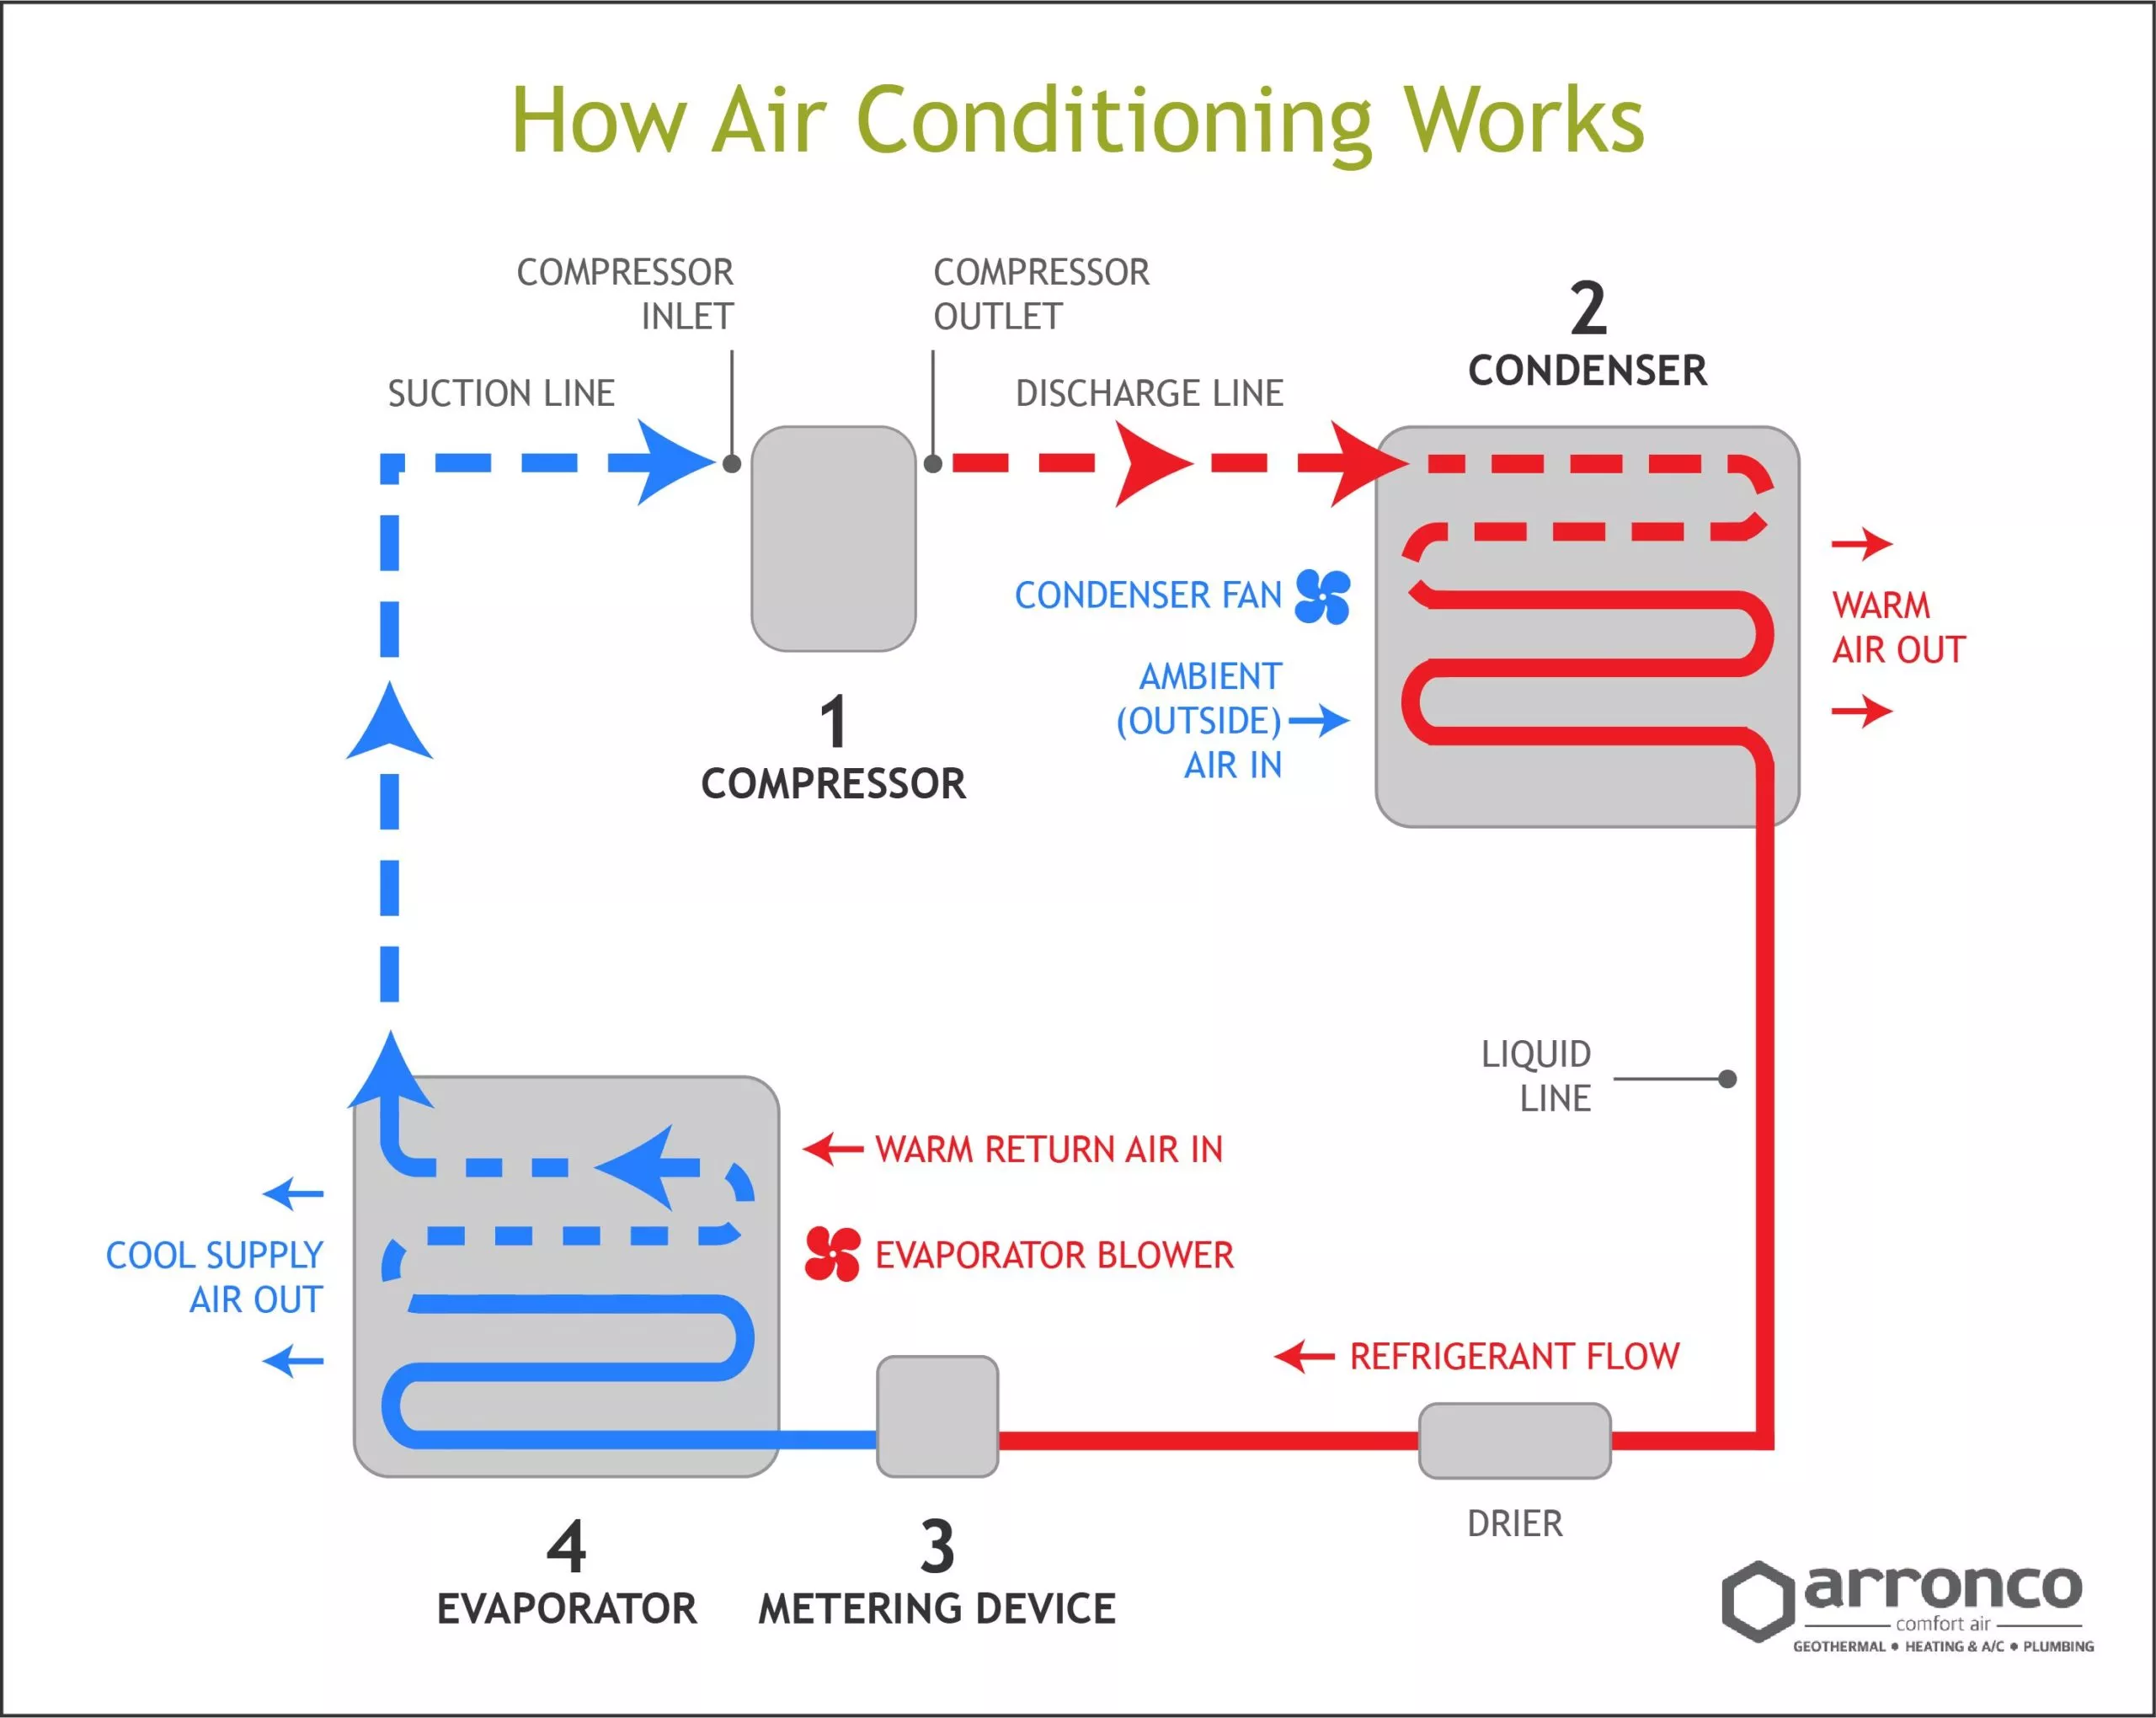 Illustration of how air conditioning works.